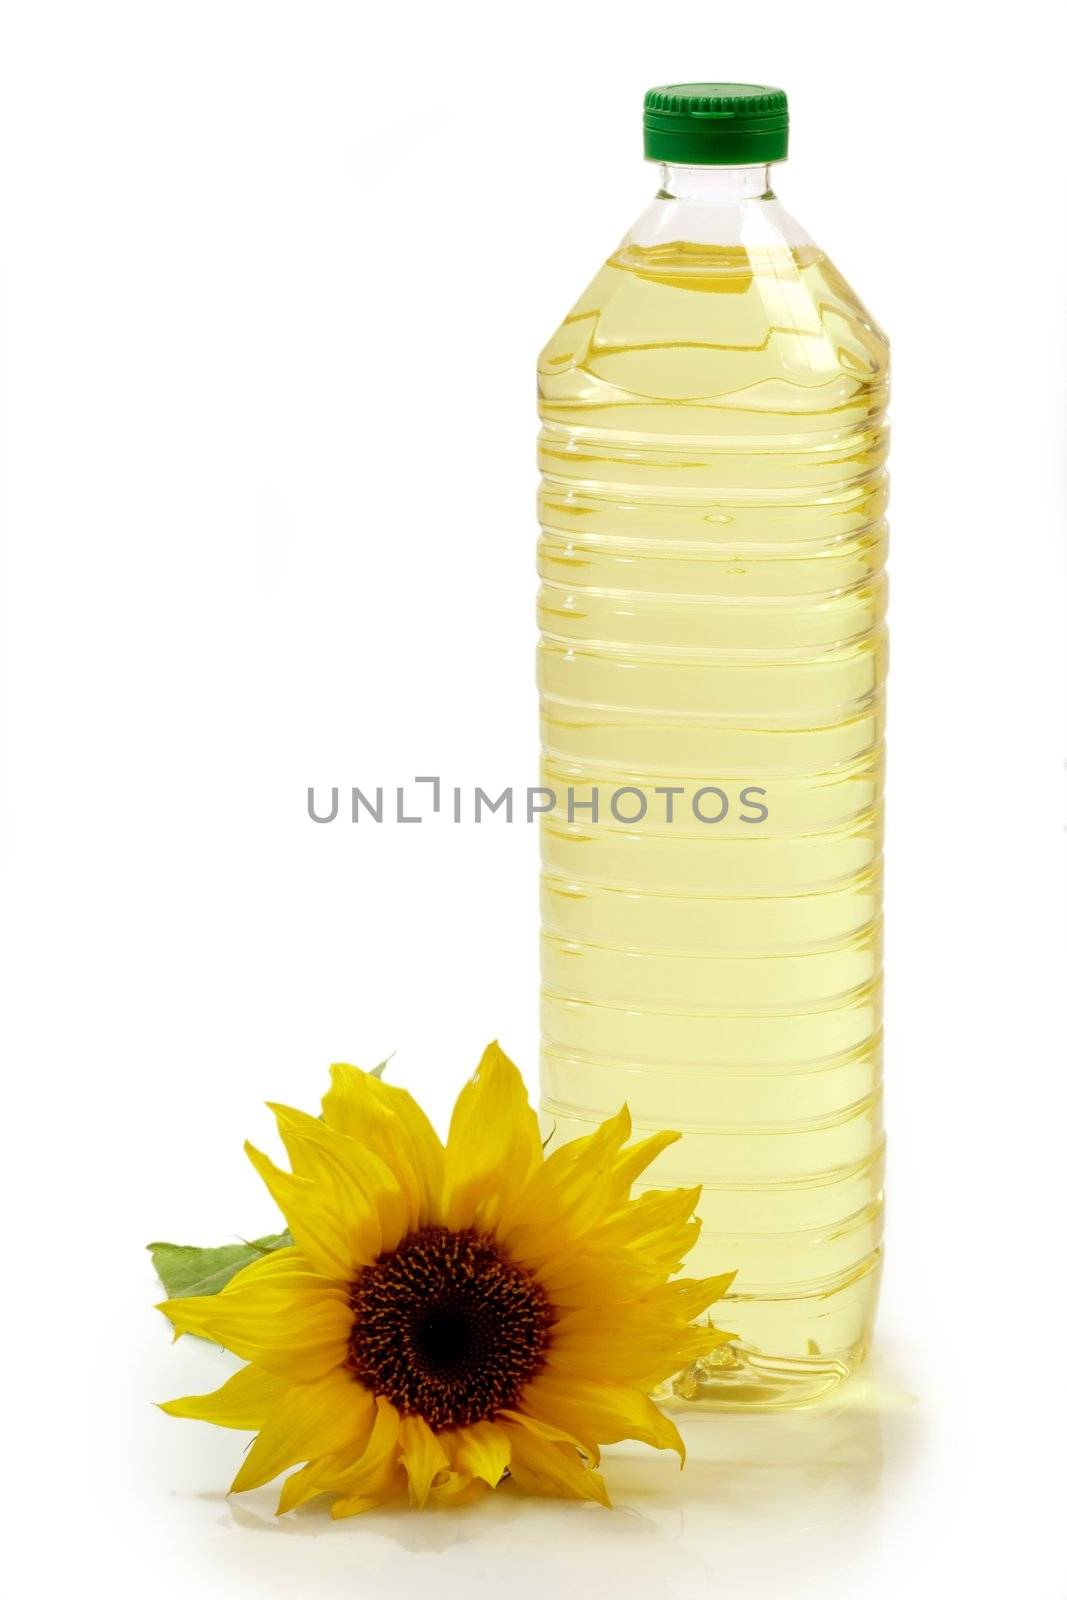 Cooking oil in a plastic bottle with sunflower on white background